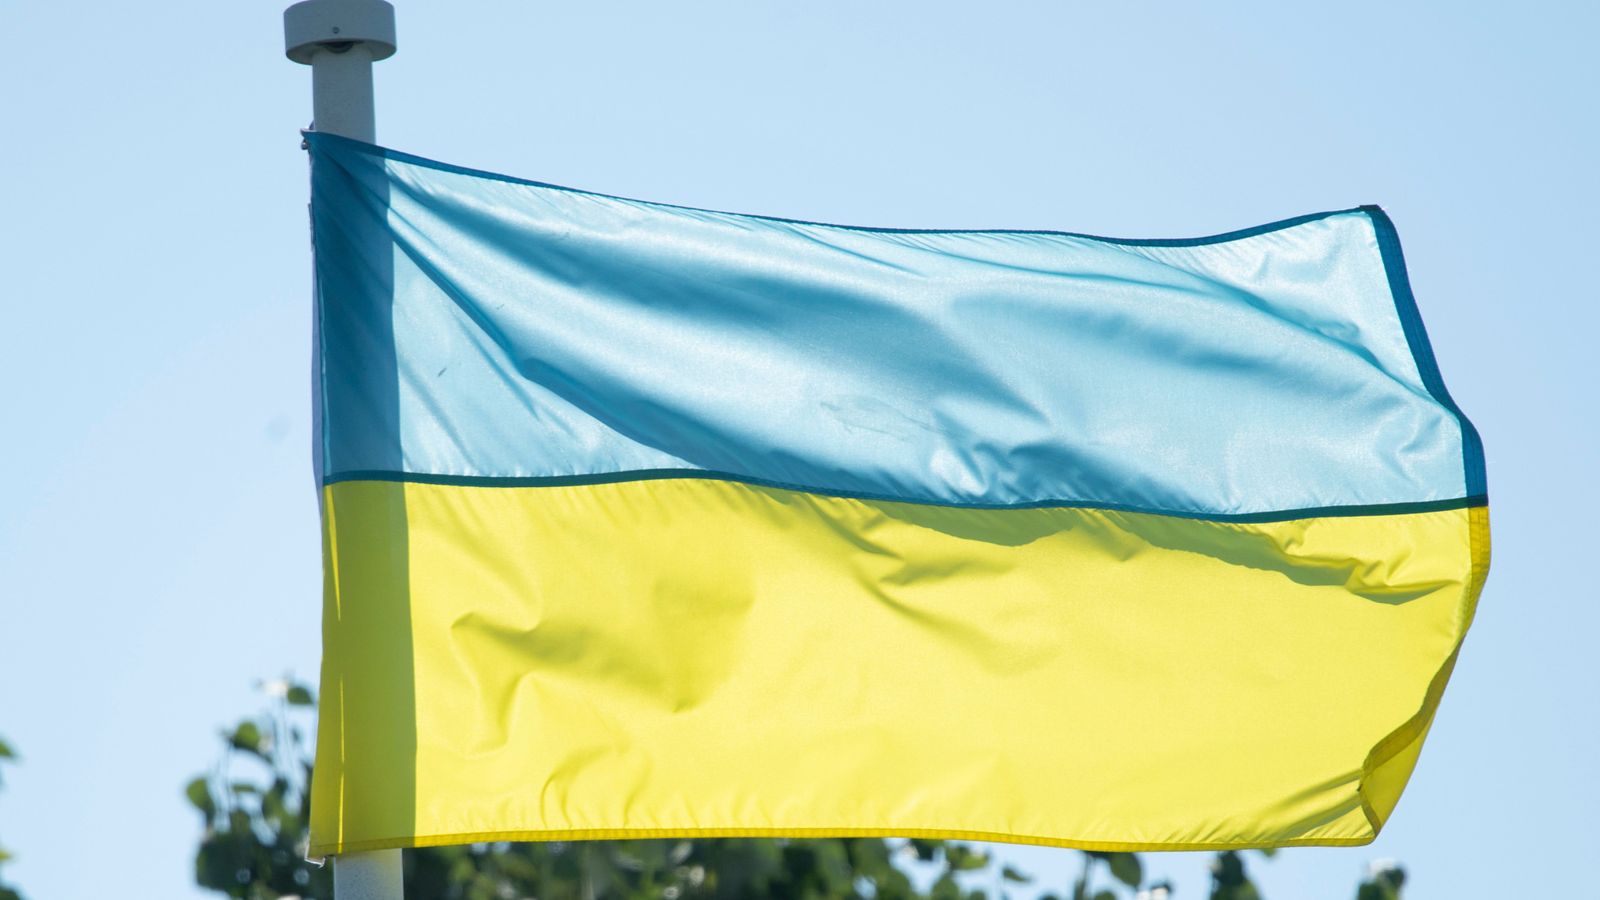 Western & Southern Open, Cincinnati: Size of Ukraine flag reason why fan was asked to remove it from grounds